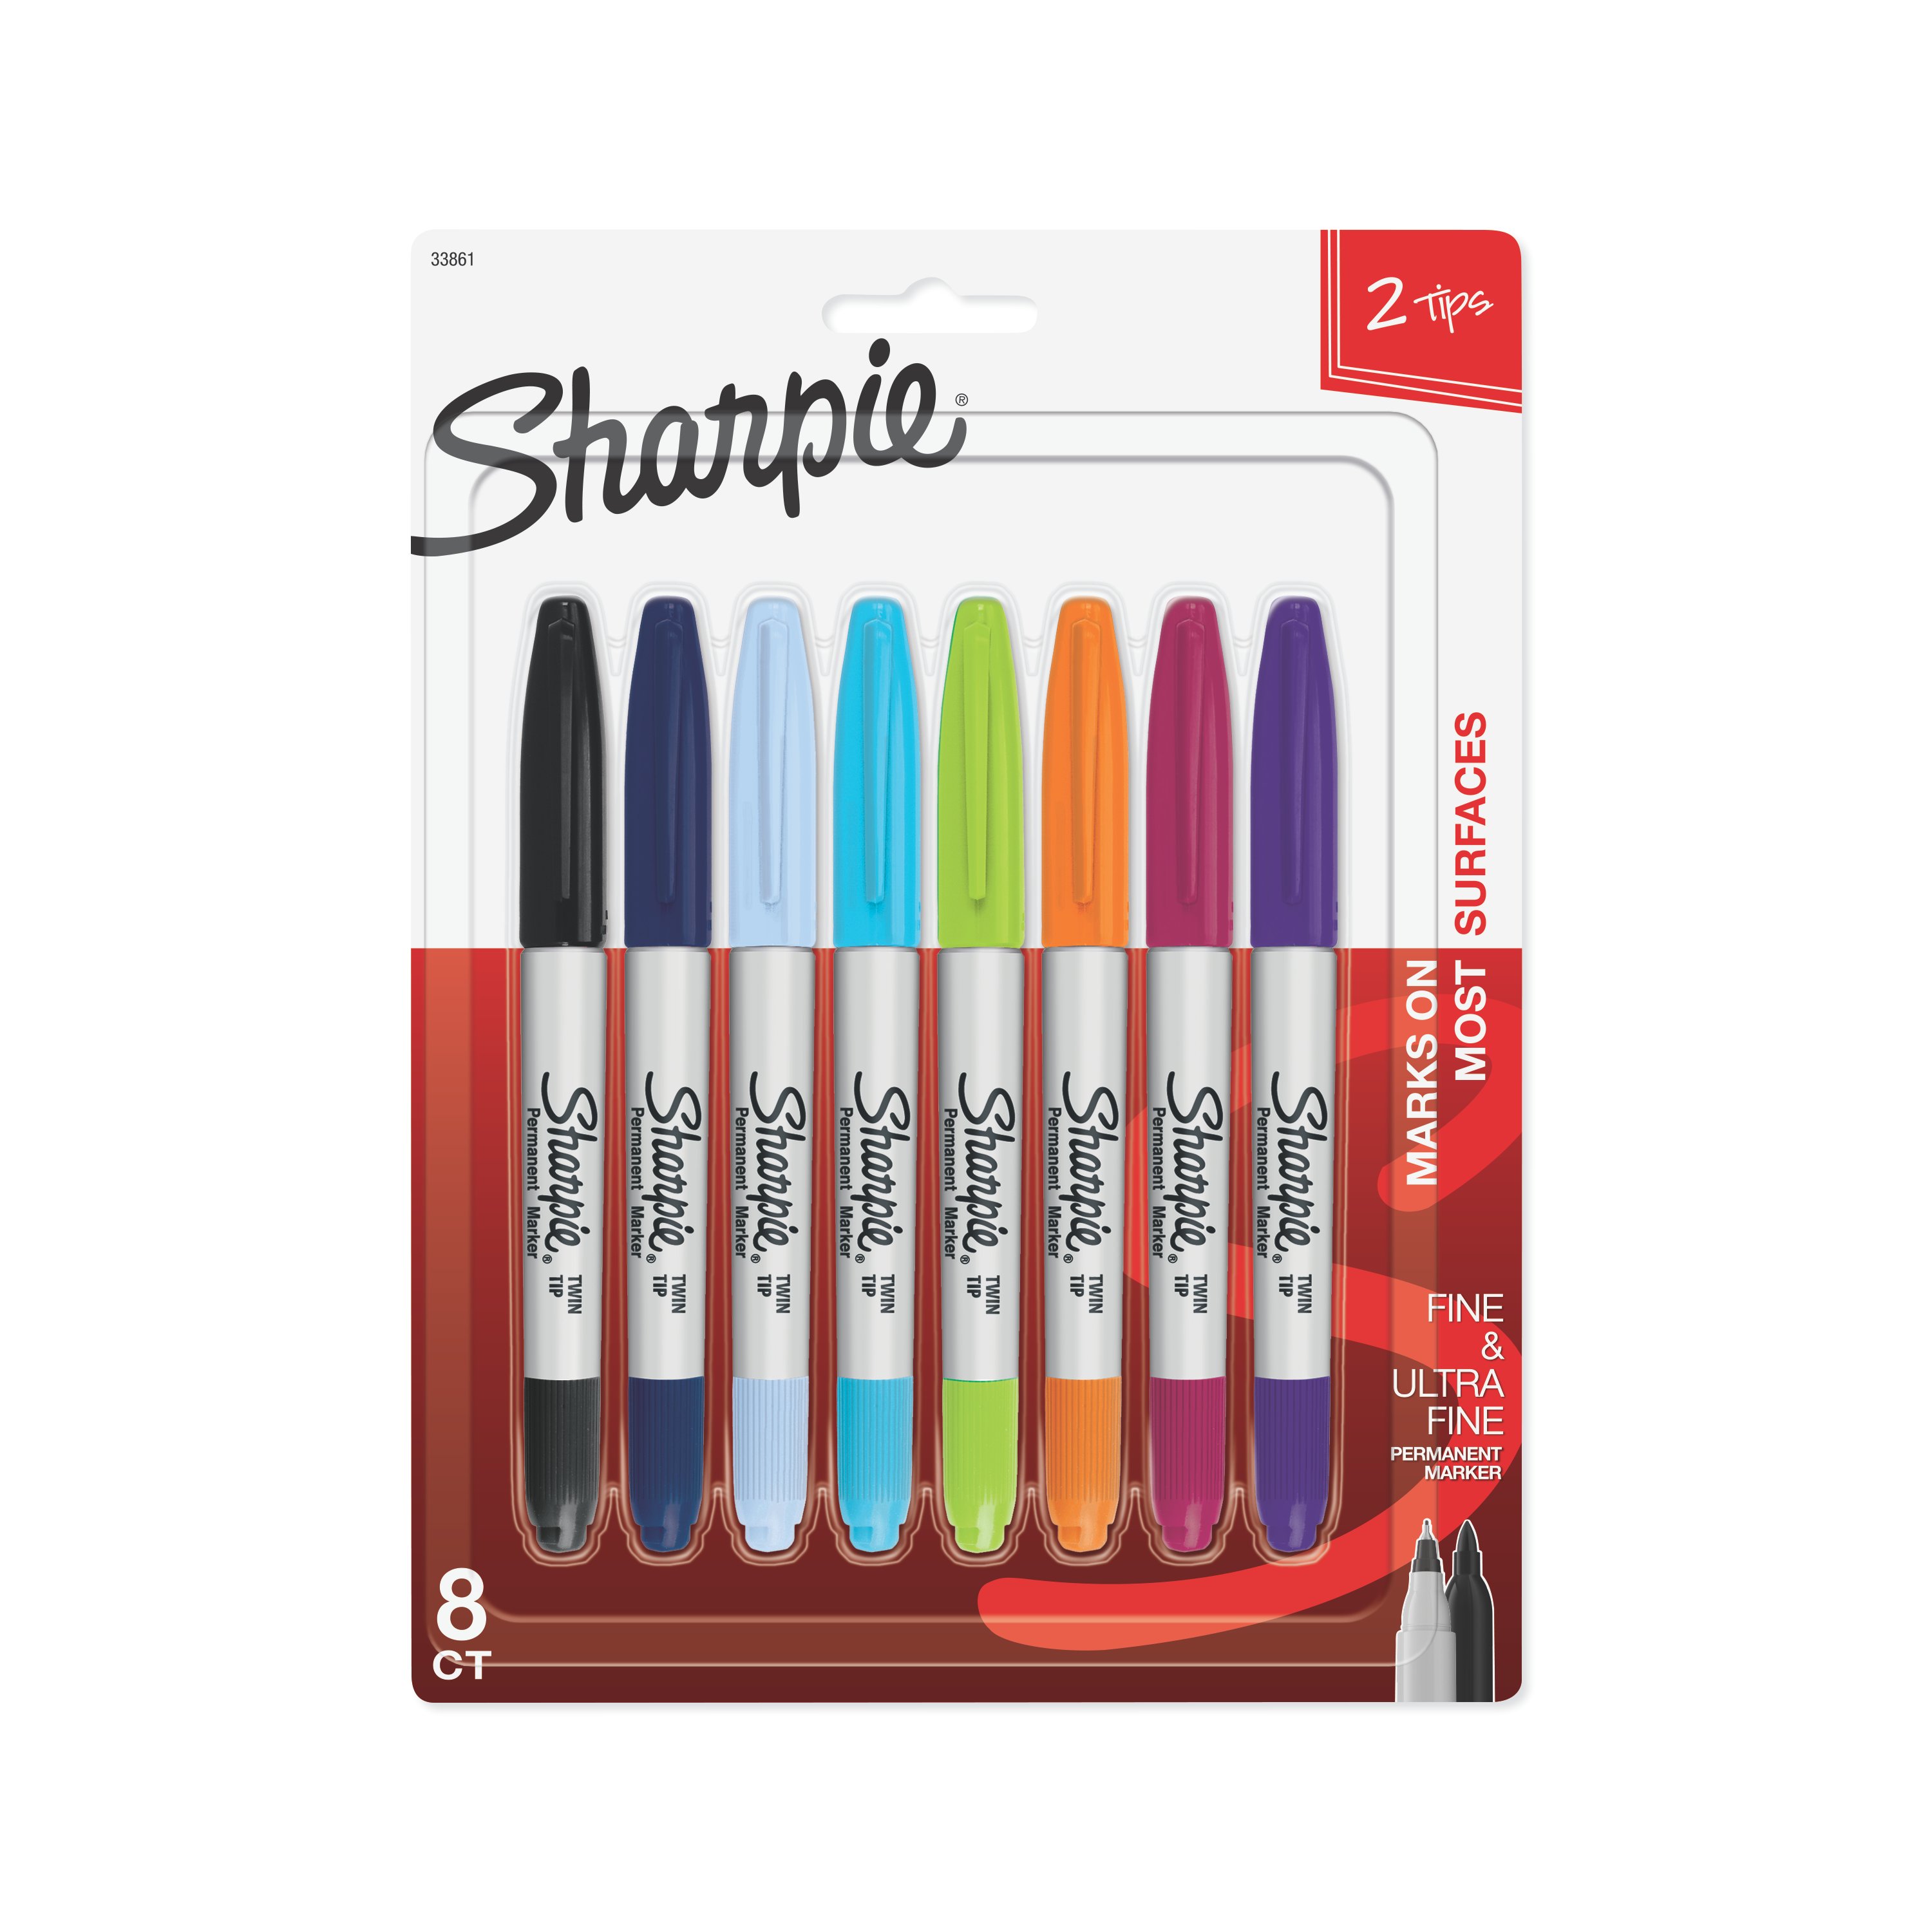 How to Revive Dried-Up Sharpies